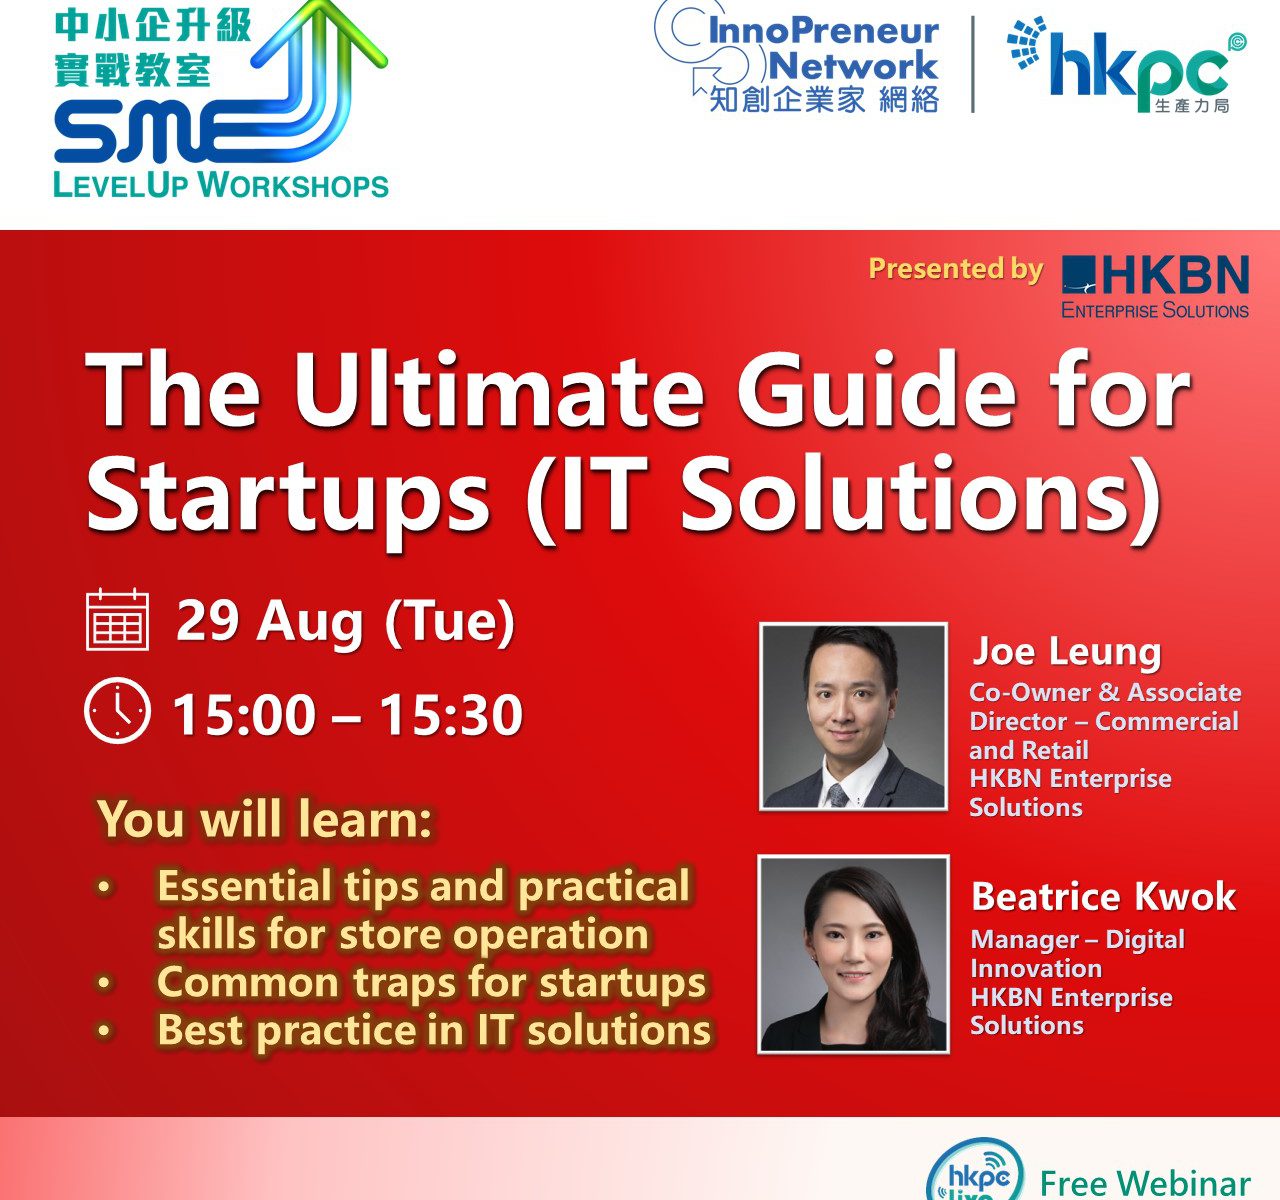 【InnoPreneur Network – SME LevelUp Workshops】: The Ultimate Guide for Startups (IT Solutions)